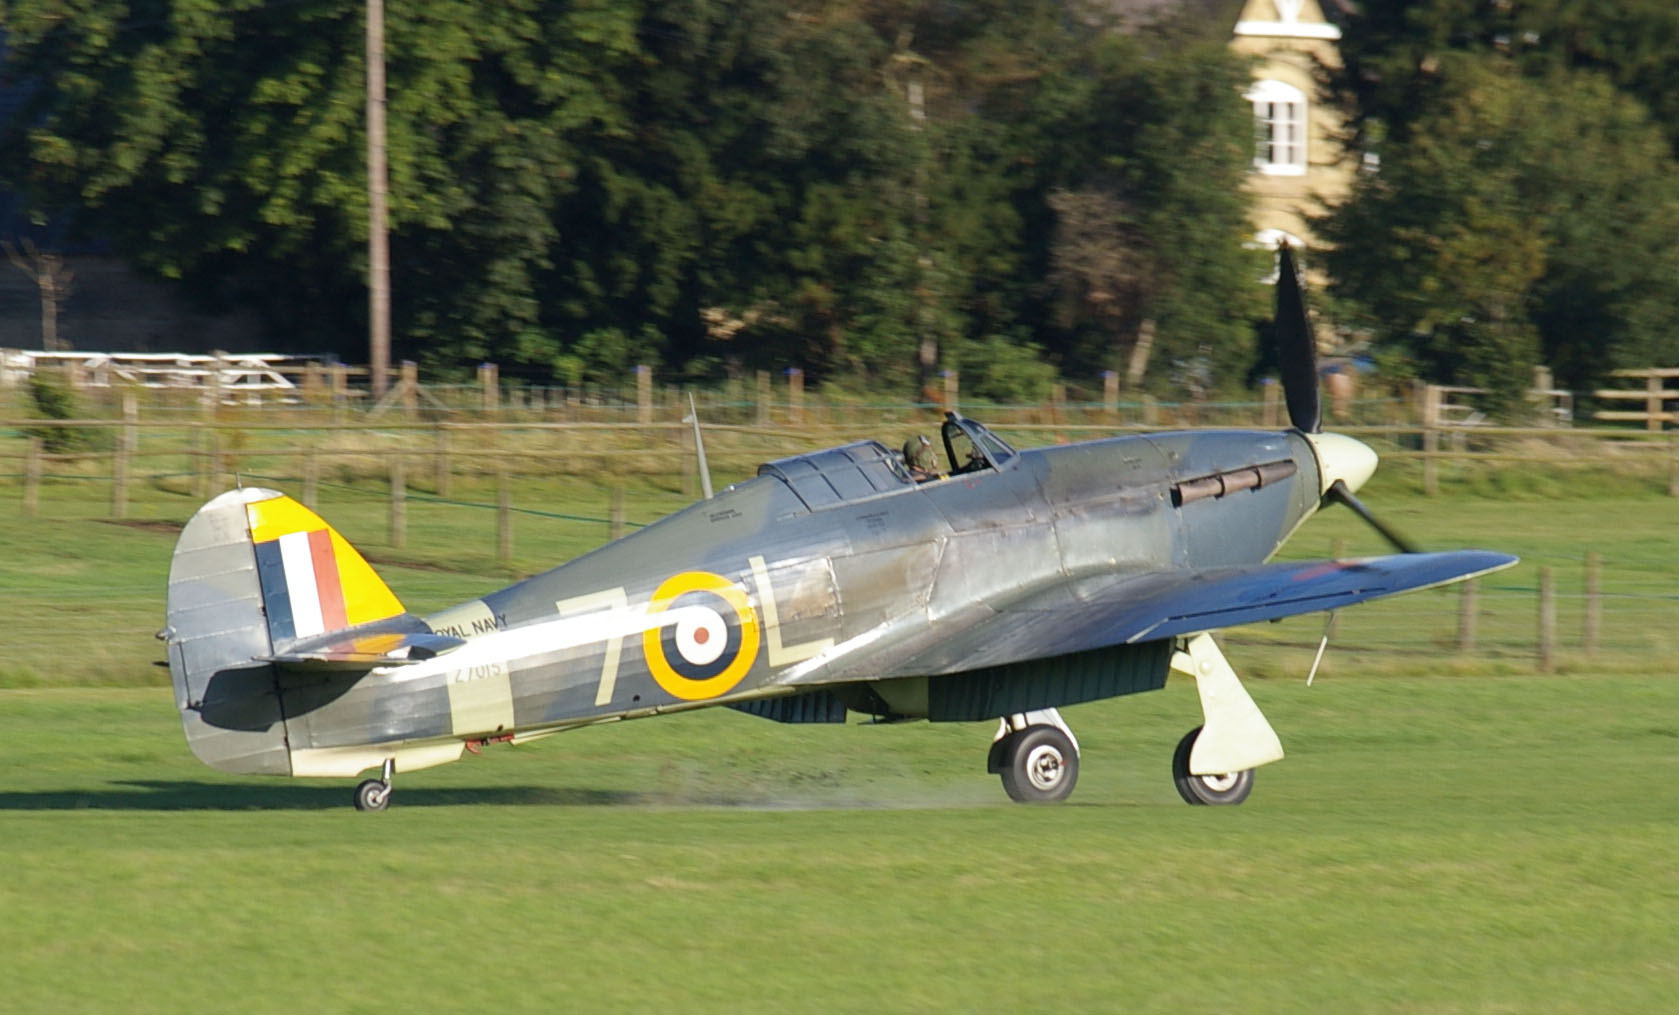 Shuttleworth evening airshow pic's - Page 1 - Boats, Planes & Trains - PistonHeads